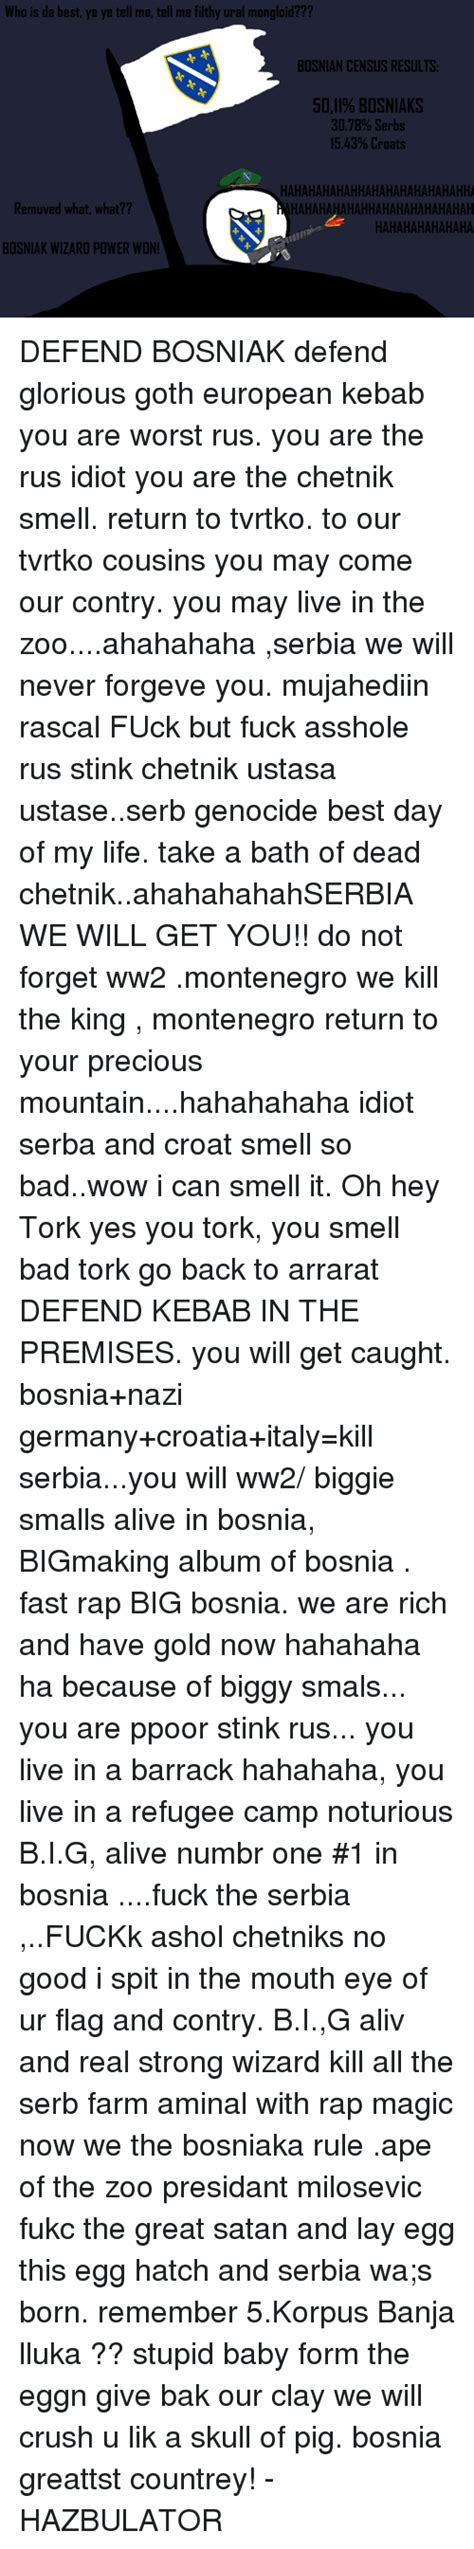 25 best memes about serbia and bossniaball serbia and bossniaball memes